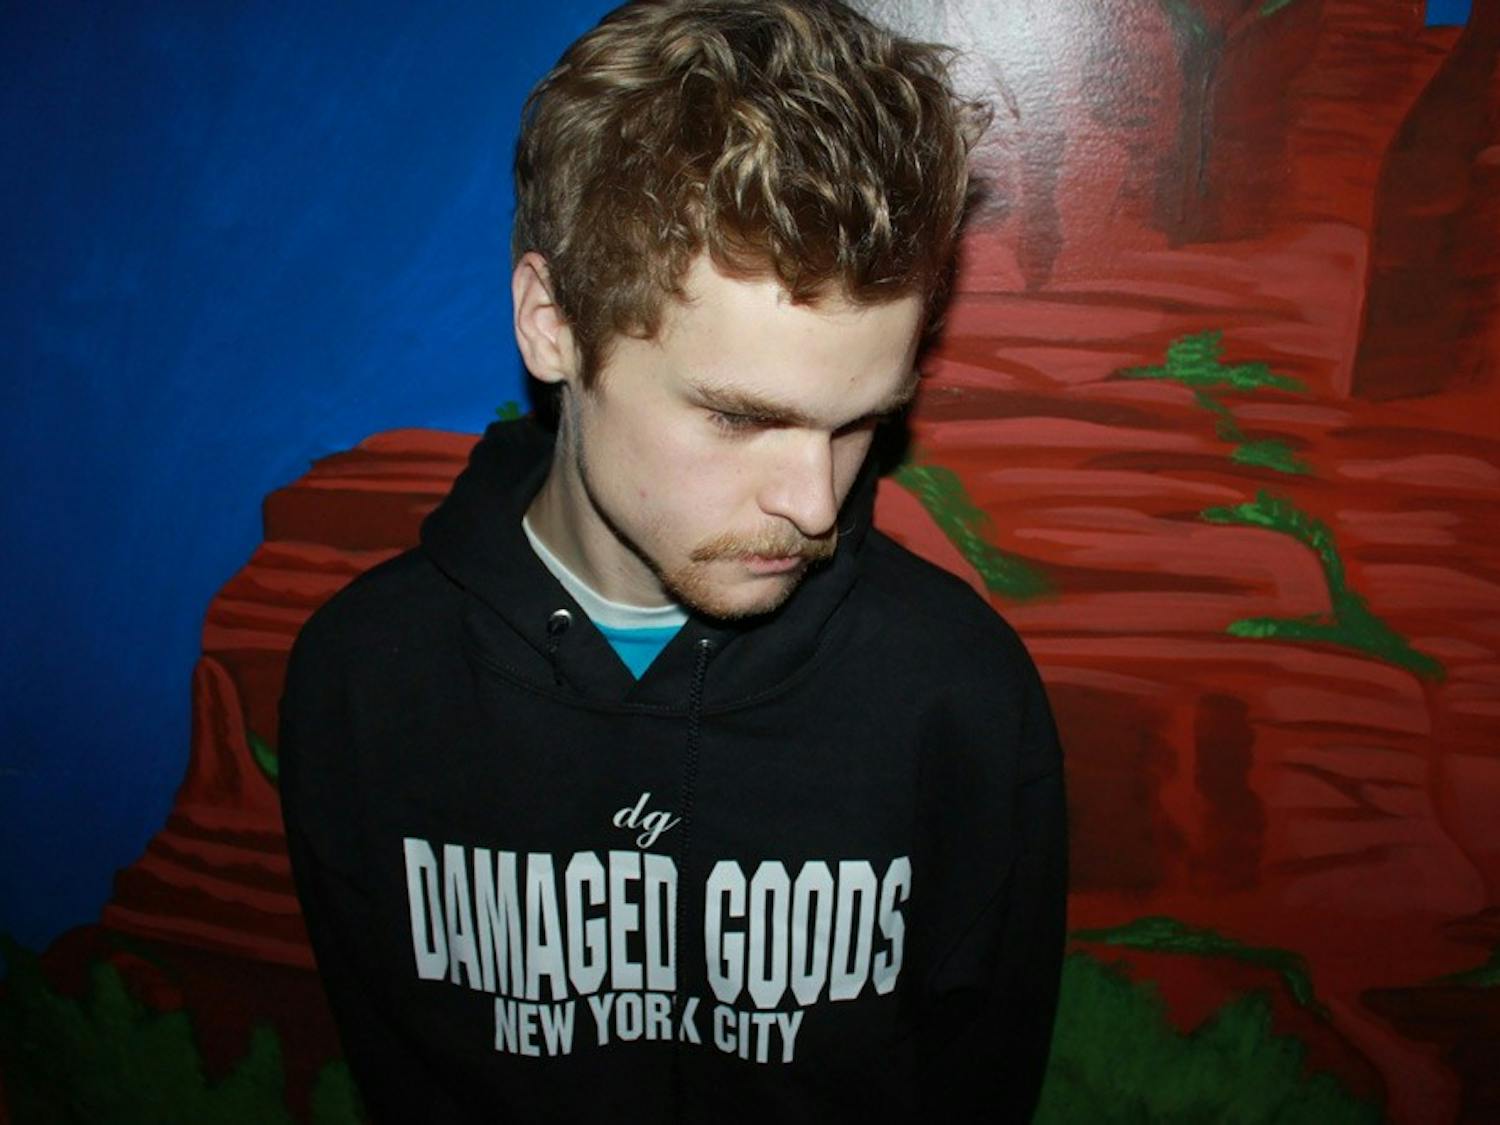 Slug Christ’s style of rapping is similar to that of Tyler, the Creator and Three 6 Mafia’s tracks, with dark undertones and a unique beat.